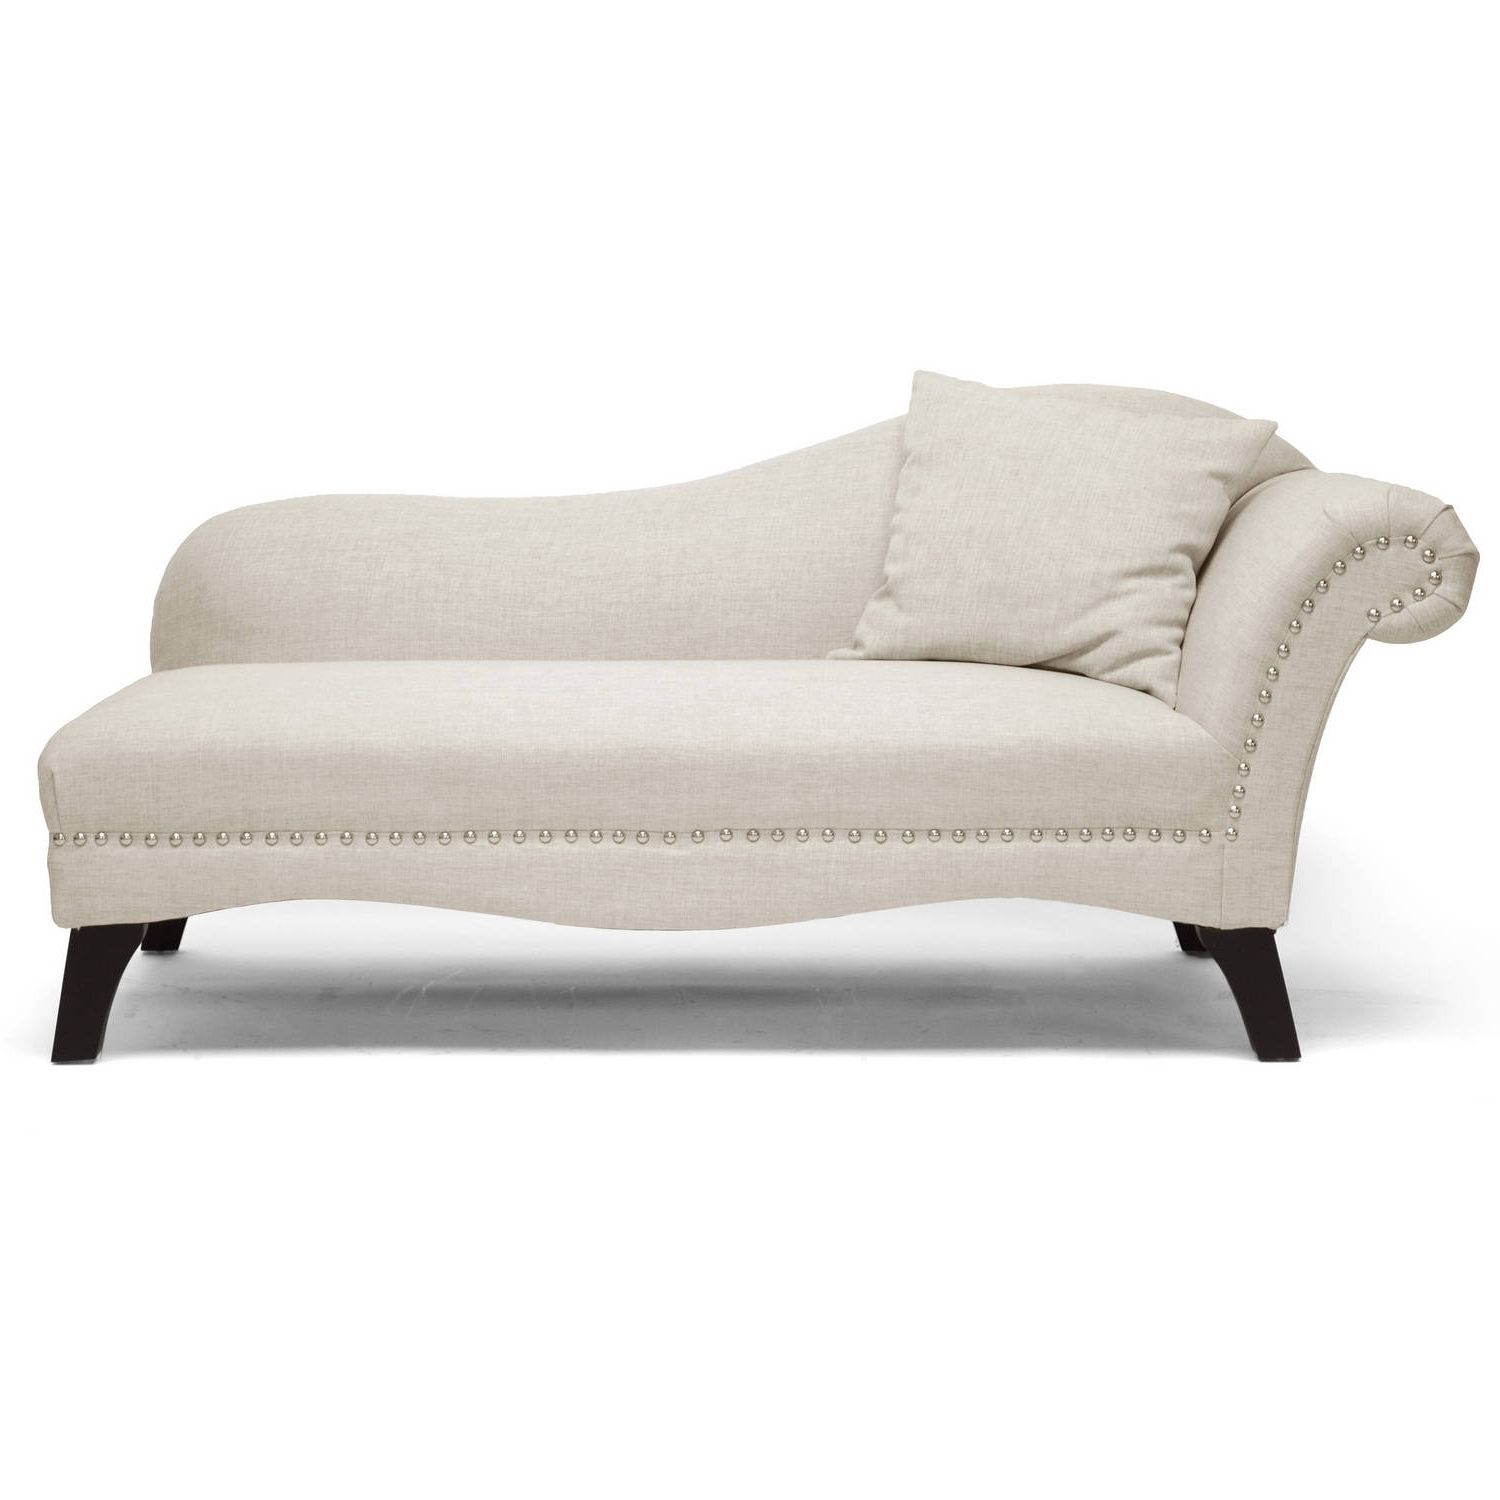 Chaise Lounge Chairs Under $300 With Regard To Newest Chaise Lounges – Walmart (View 2 of 15)